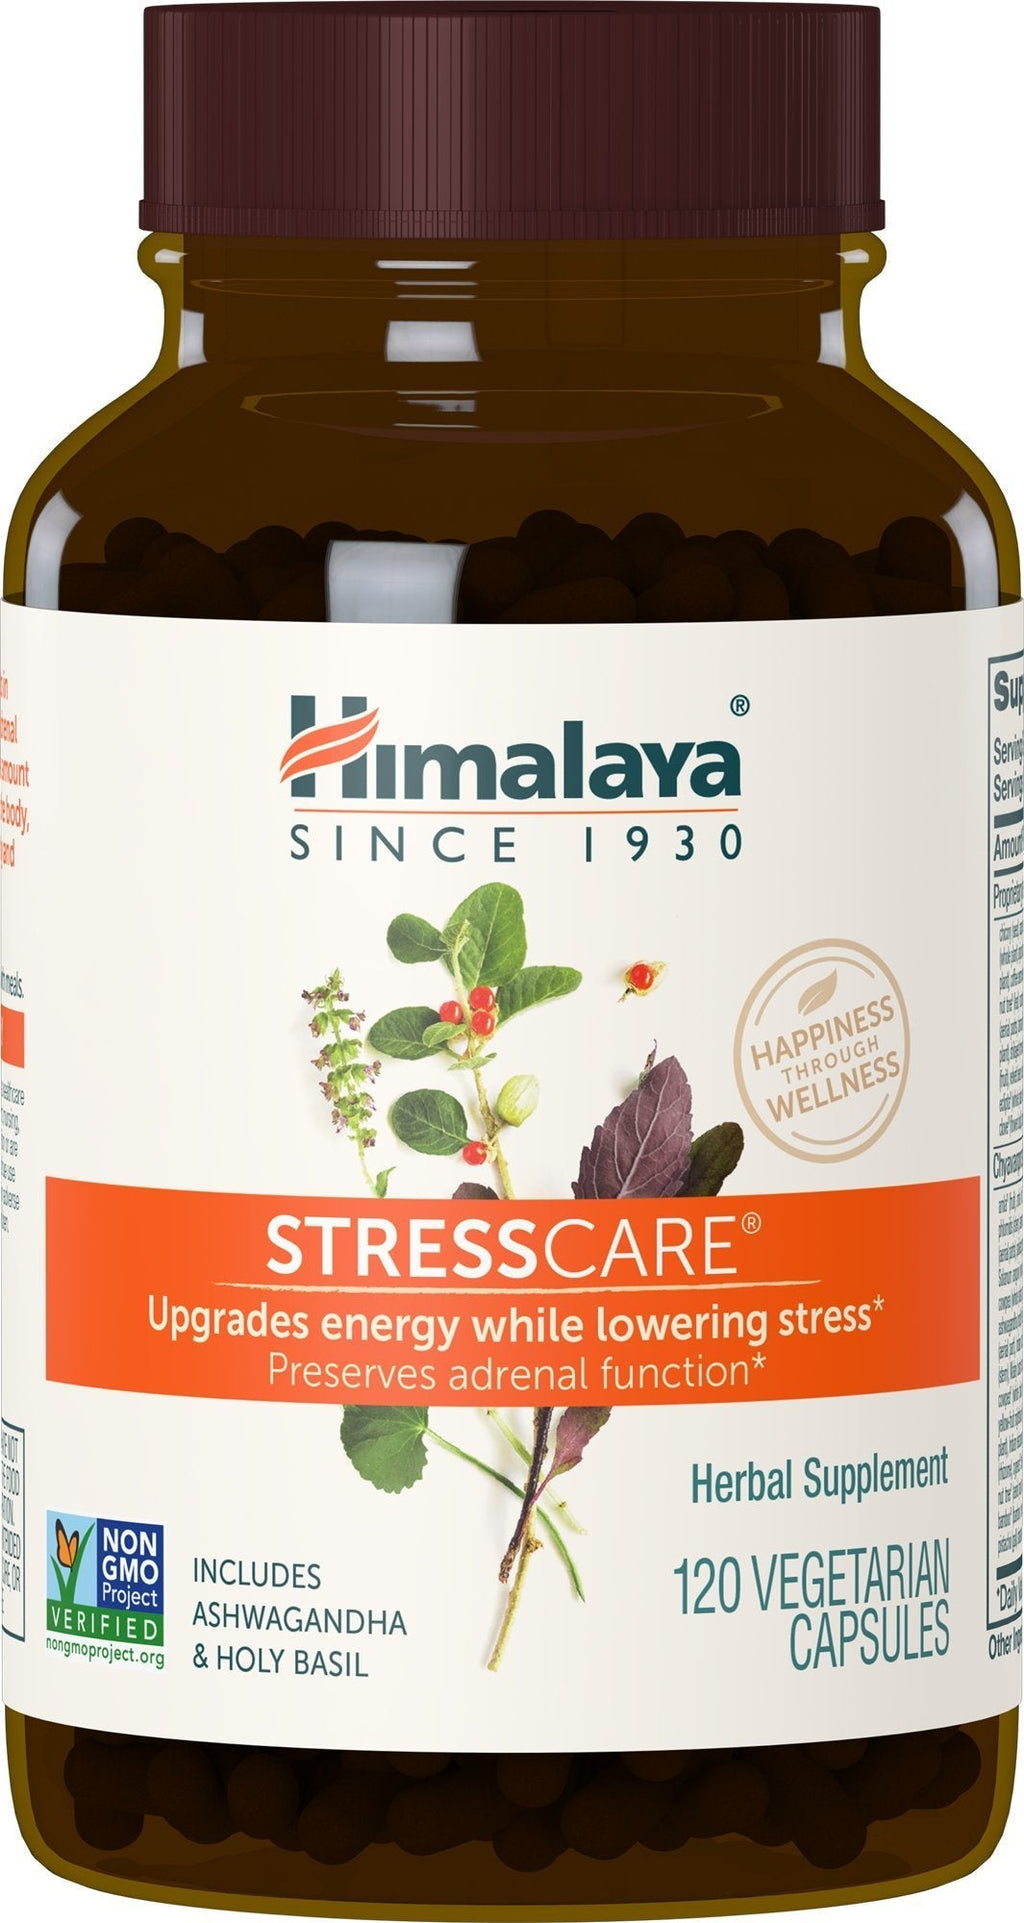 [Australia] - Himalaya StressCare for Natural Stress Relief, 120 Capsules, 1 Month Supply 